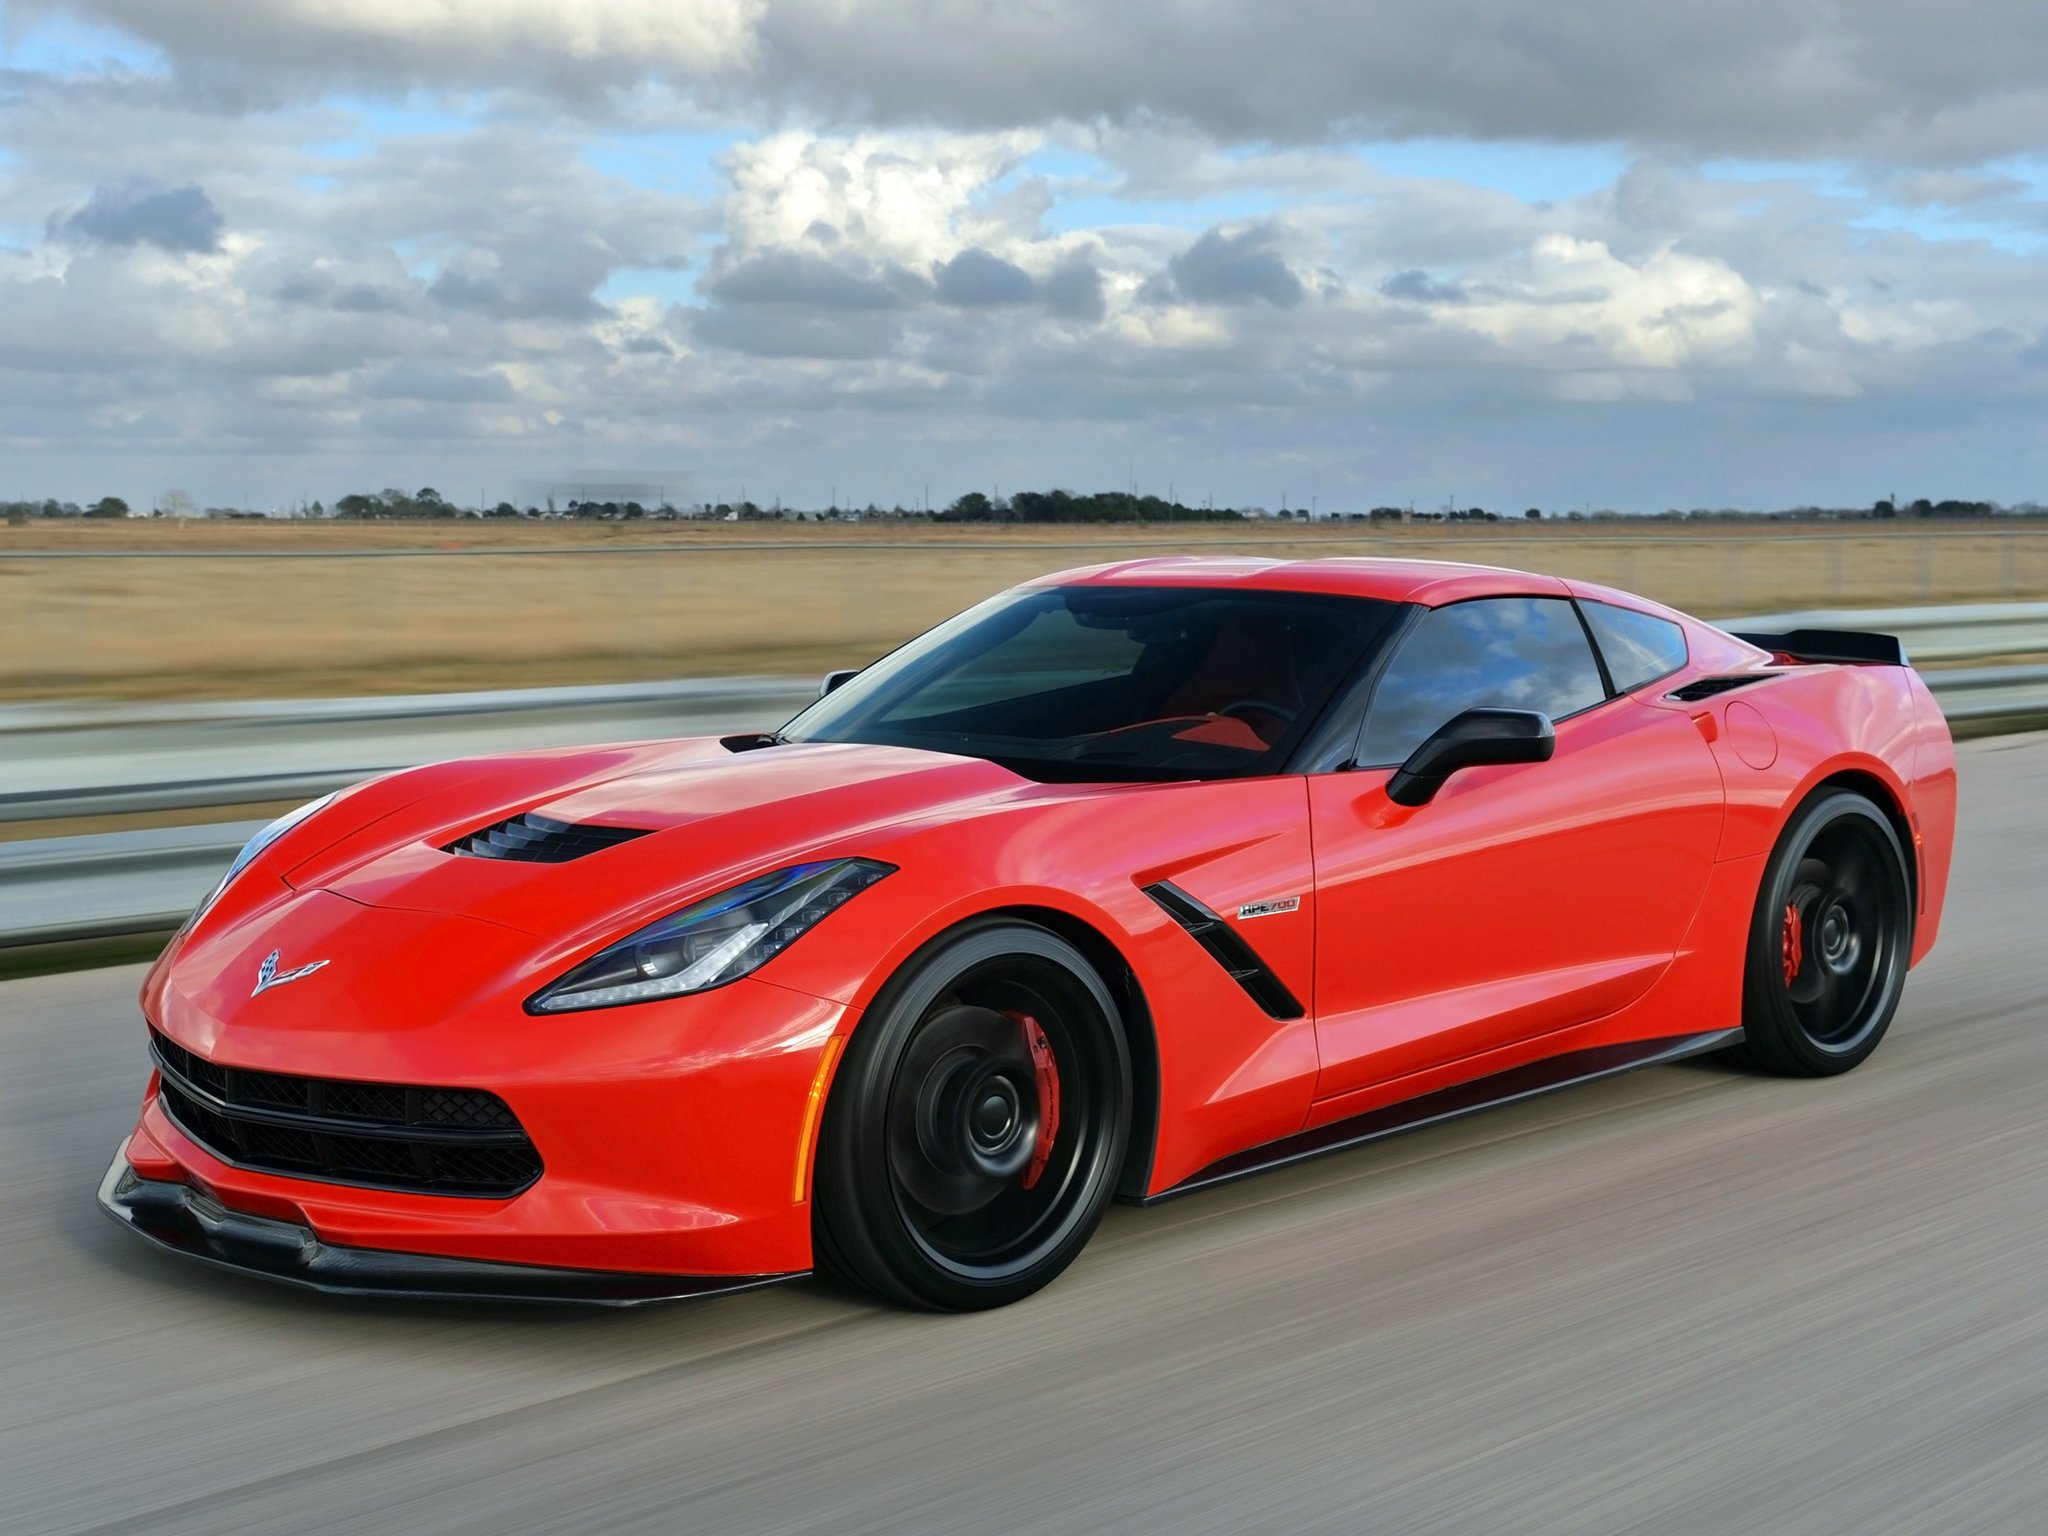 2014, Hennessey, Chevrolet, Corvette, Stingray, Hpe700, Twin, Turbo, C 7, Supercar, Muscle, Sting, Ray Wallpaper